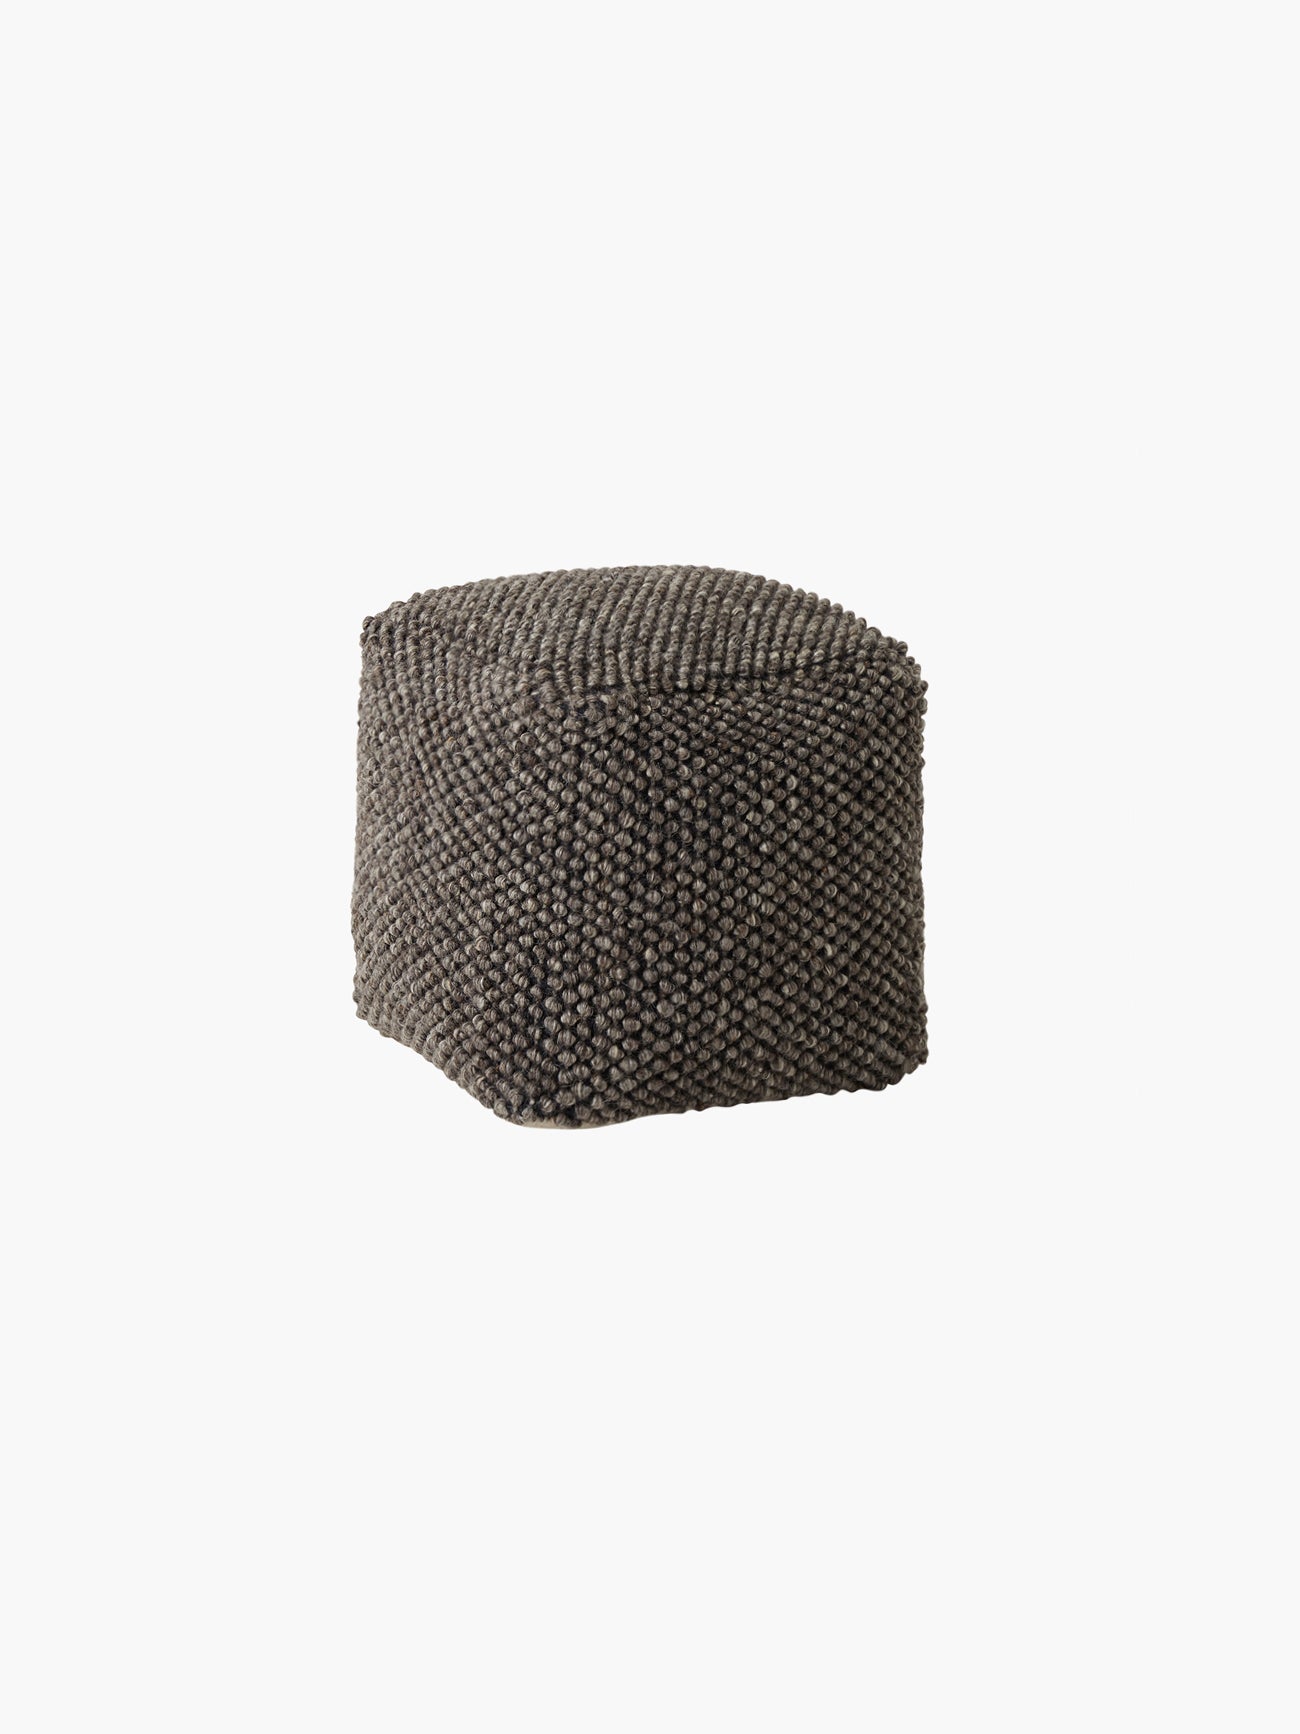 French Connection - Dark Grey Bouclé Pouffe | French Connection |  Chair & Sofa Cushions | One size - Grey - Size: OS